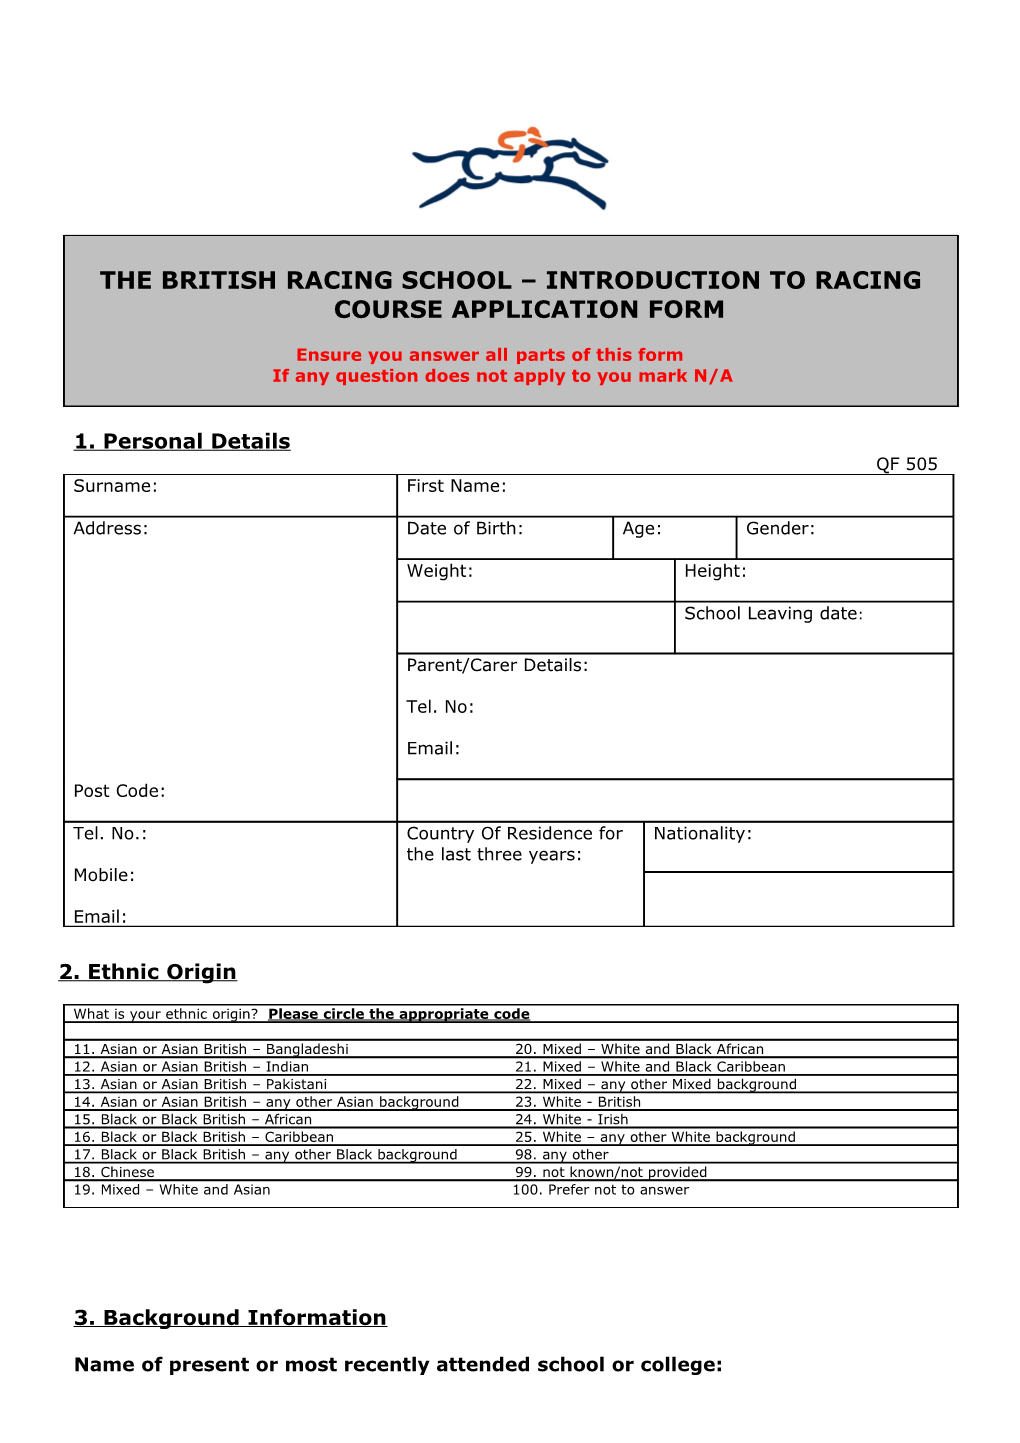 The British Racing School Introduction to Racing Courseapplication Form